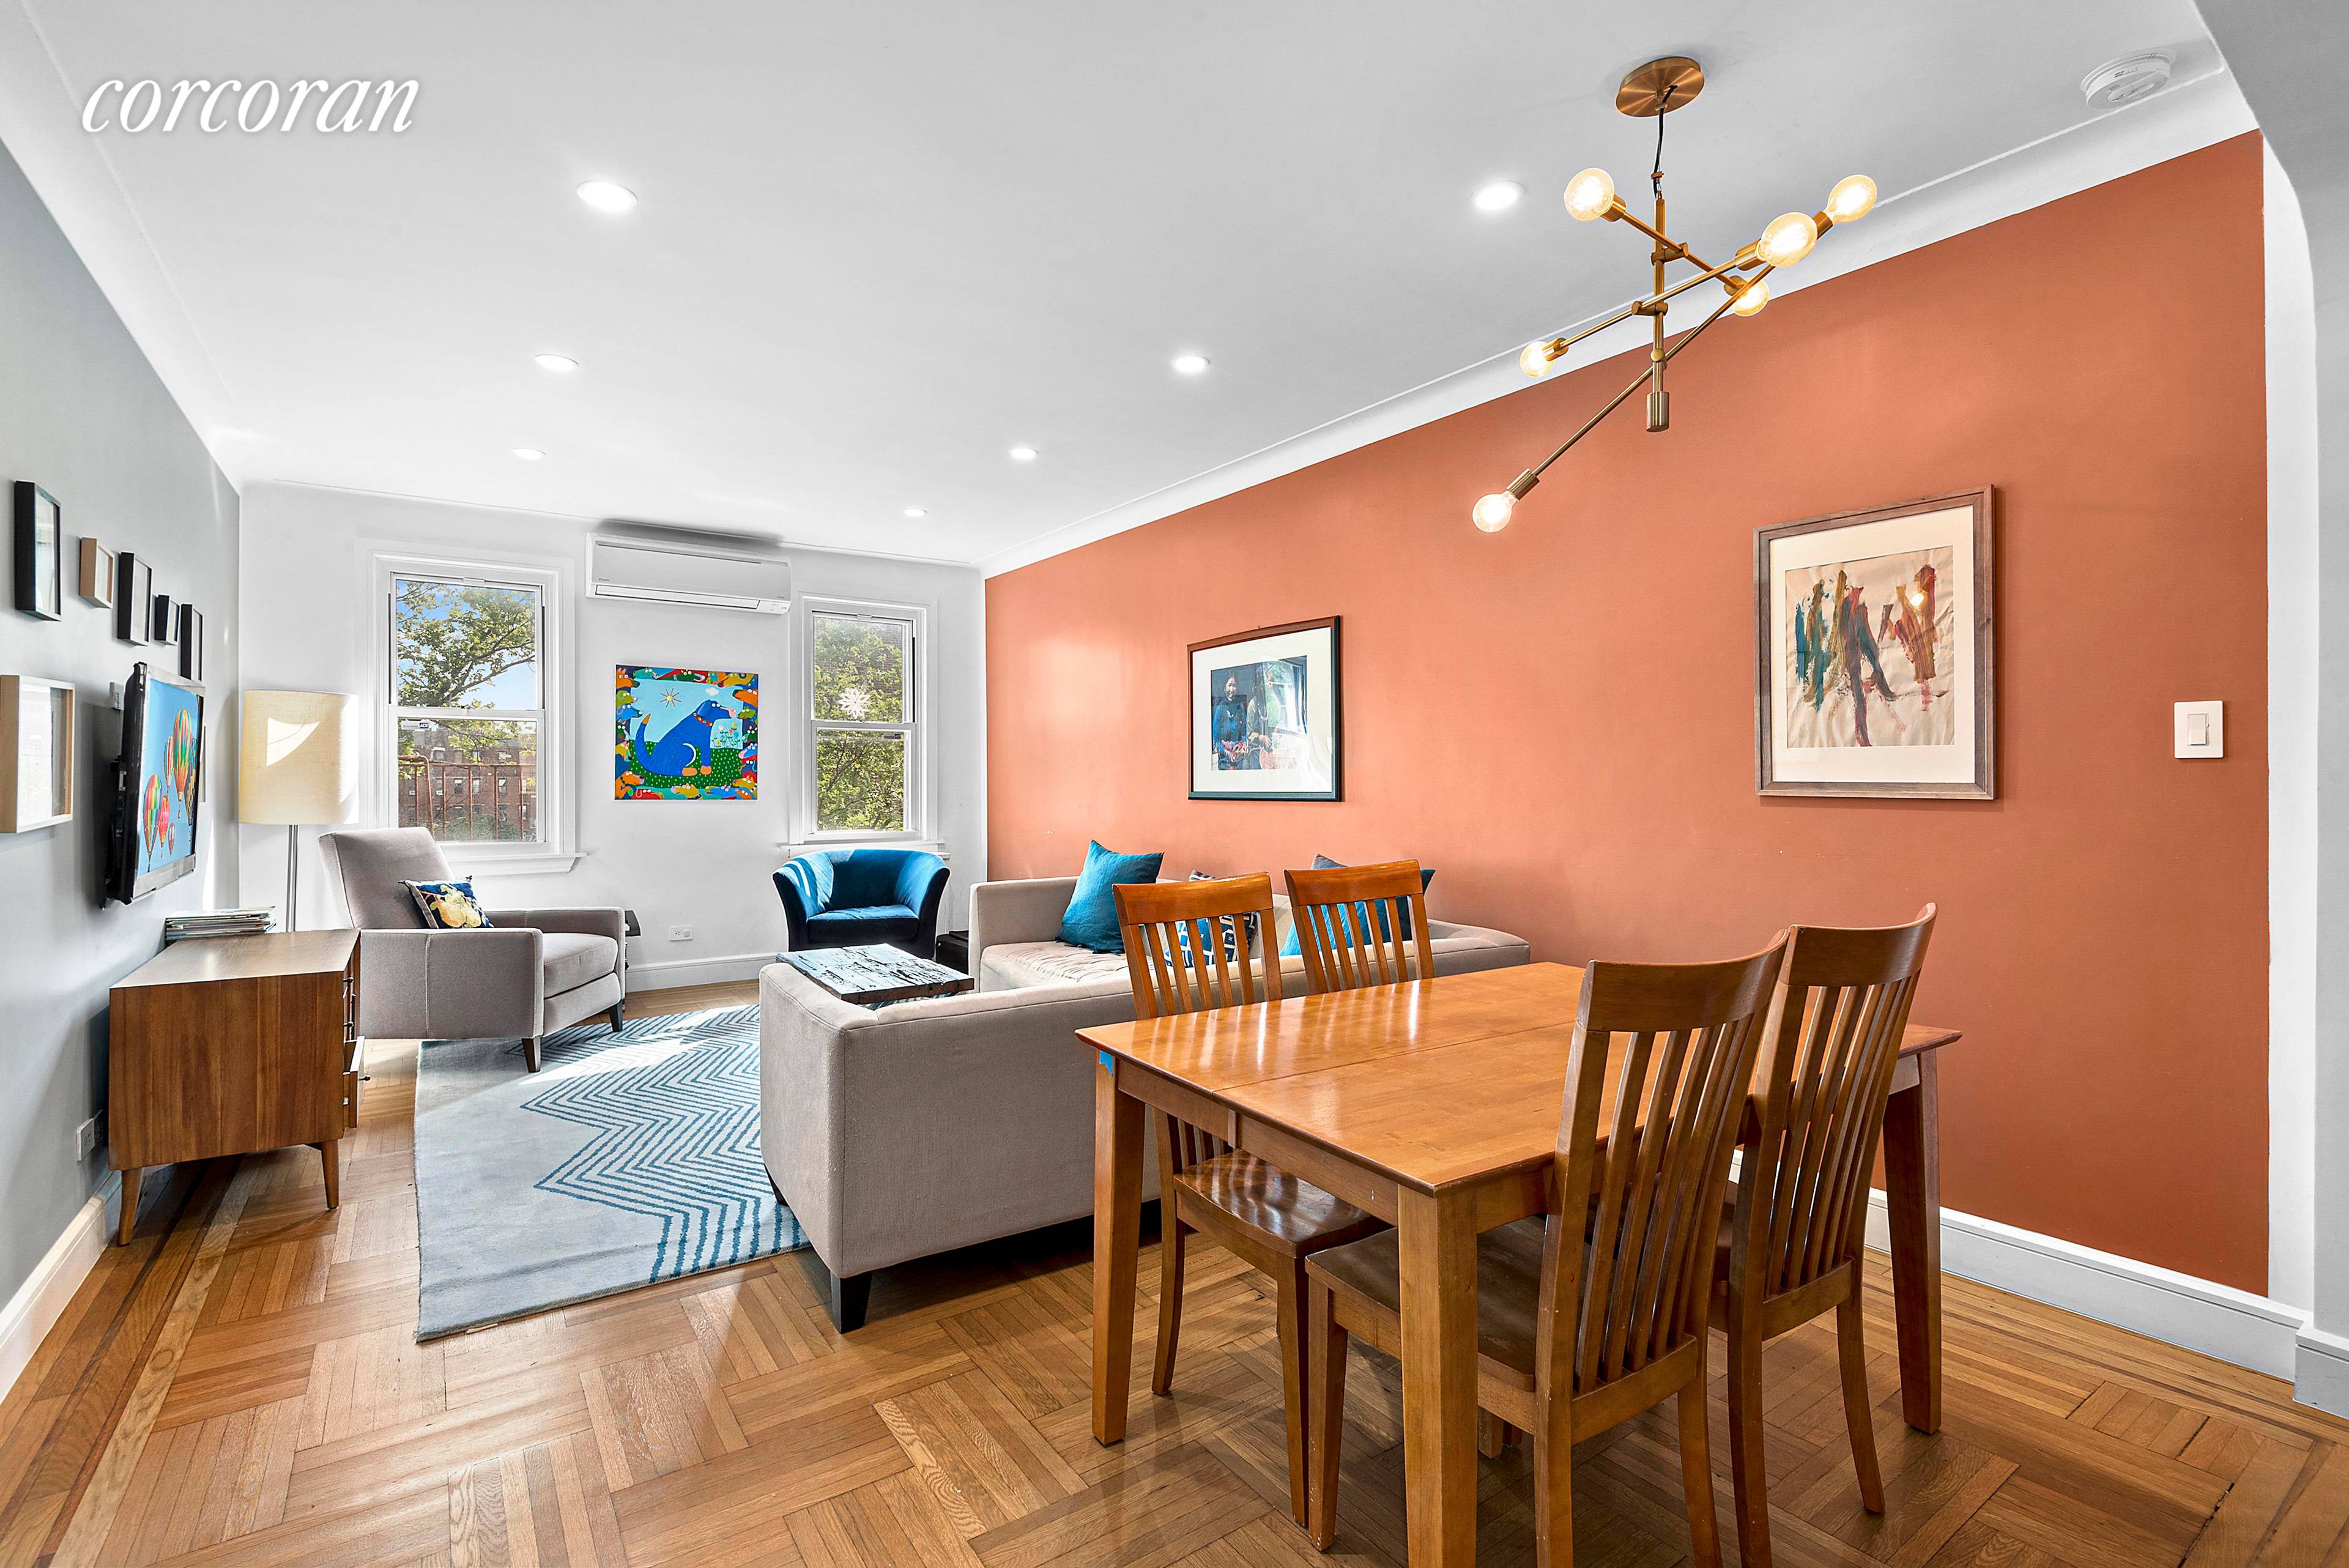 Welcome to this stunning pre war Coop located directly across the street from Prospect Park !